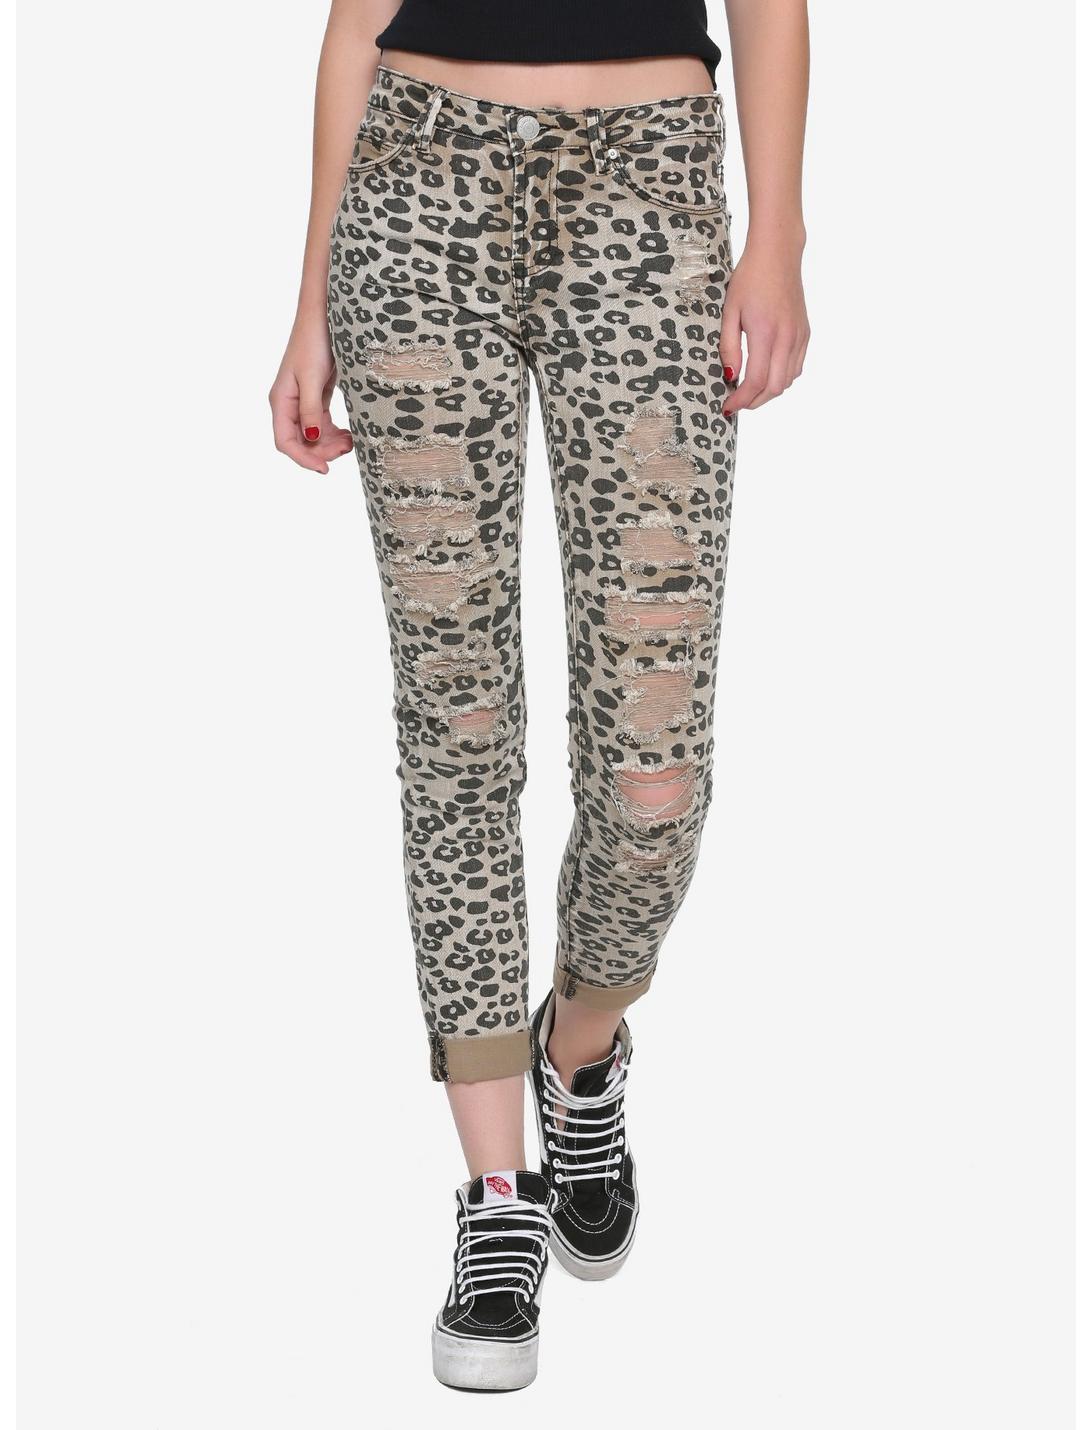 Almost Famous Animal Print Ripped Jeans, ANIMAL, hi-res